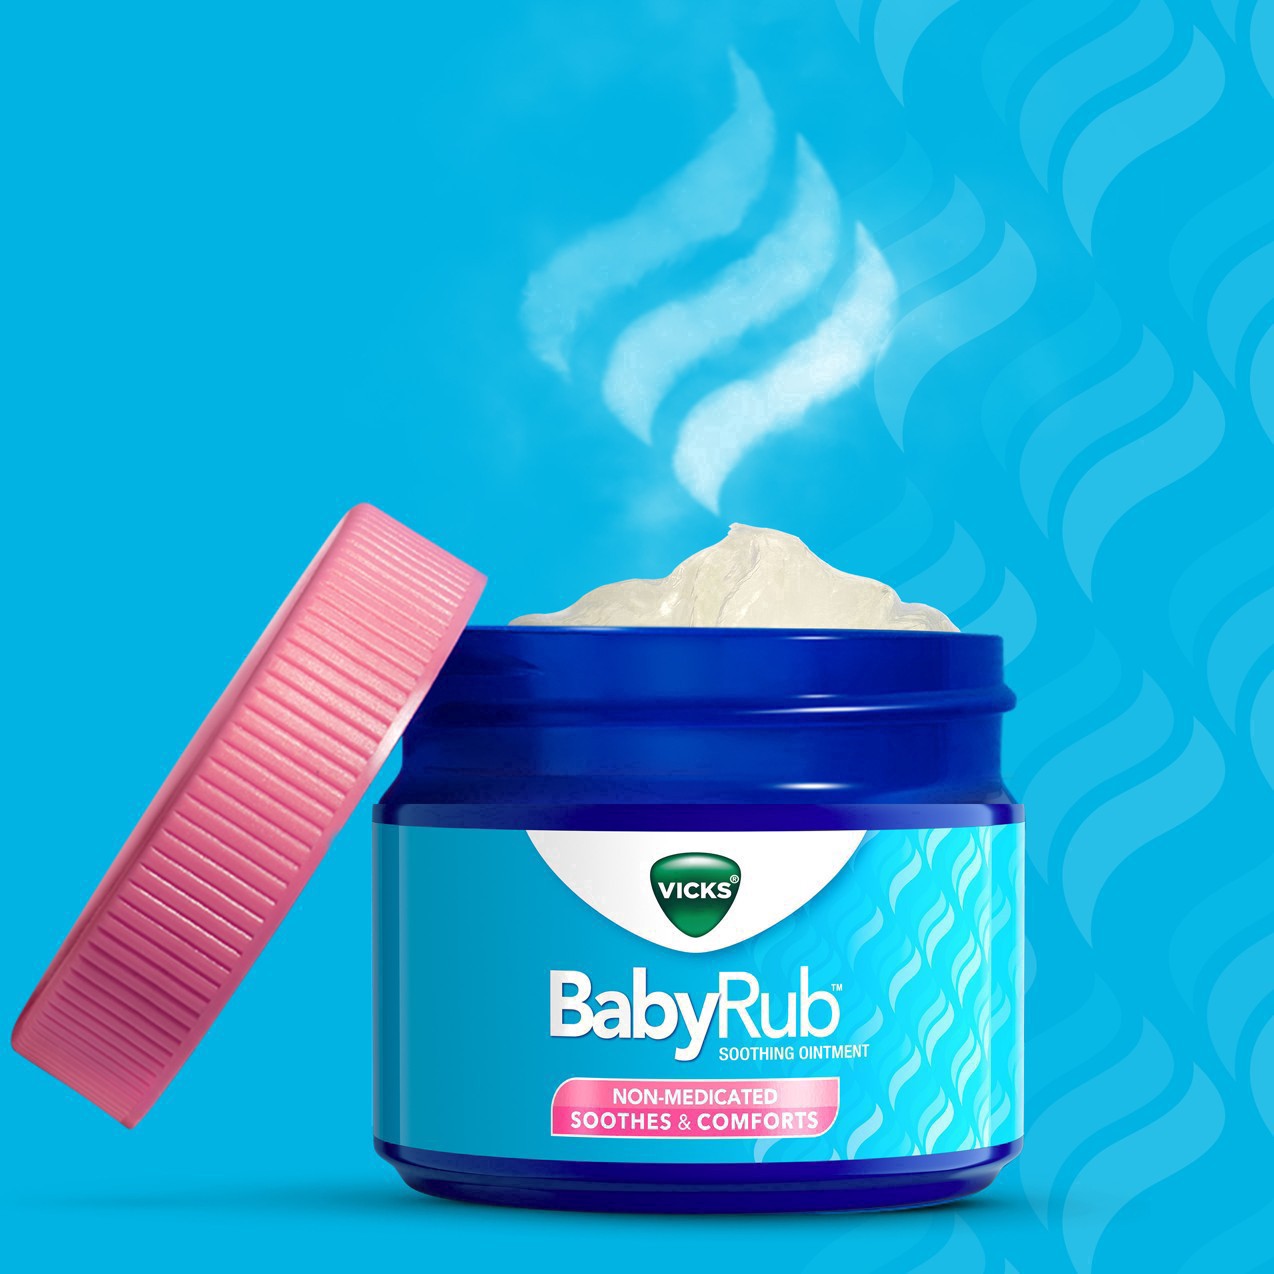 slide 56 of 78, Vicks BabyRub, Chest Rub Ointment with Soothing Aloe, Eucalyptus, Lavender, and Rosemary, from The Makers of VapoRub, 1.76 oz, 1.76 oz